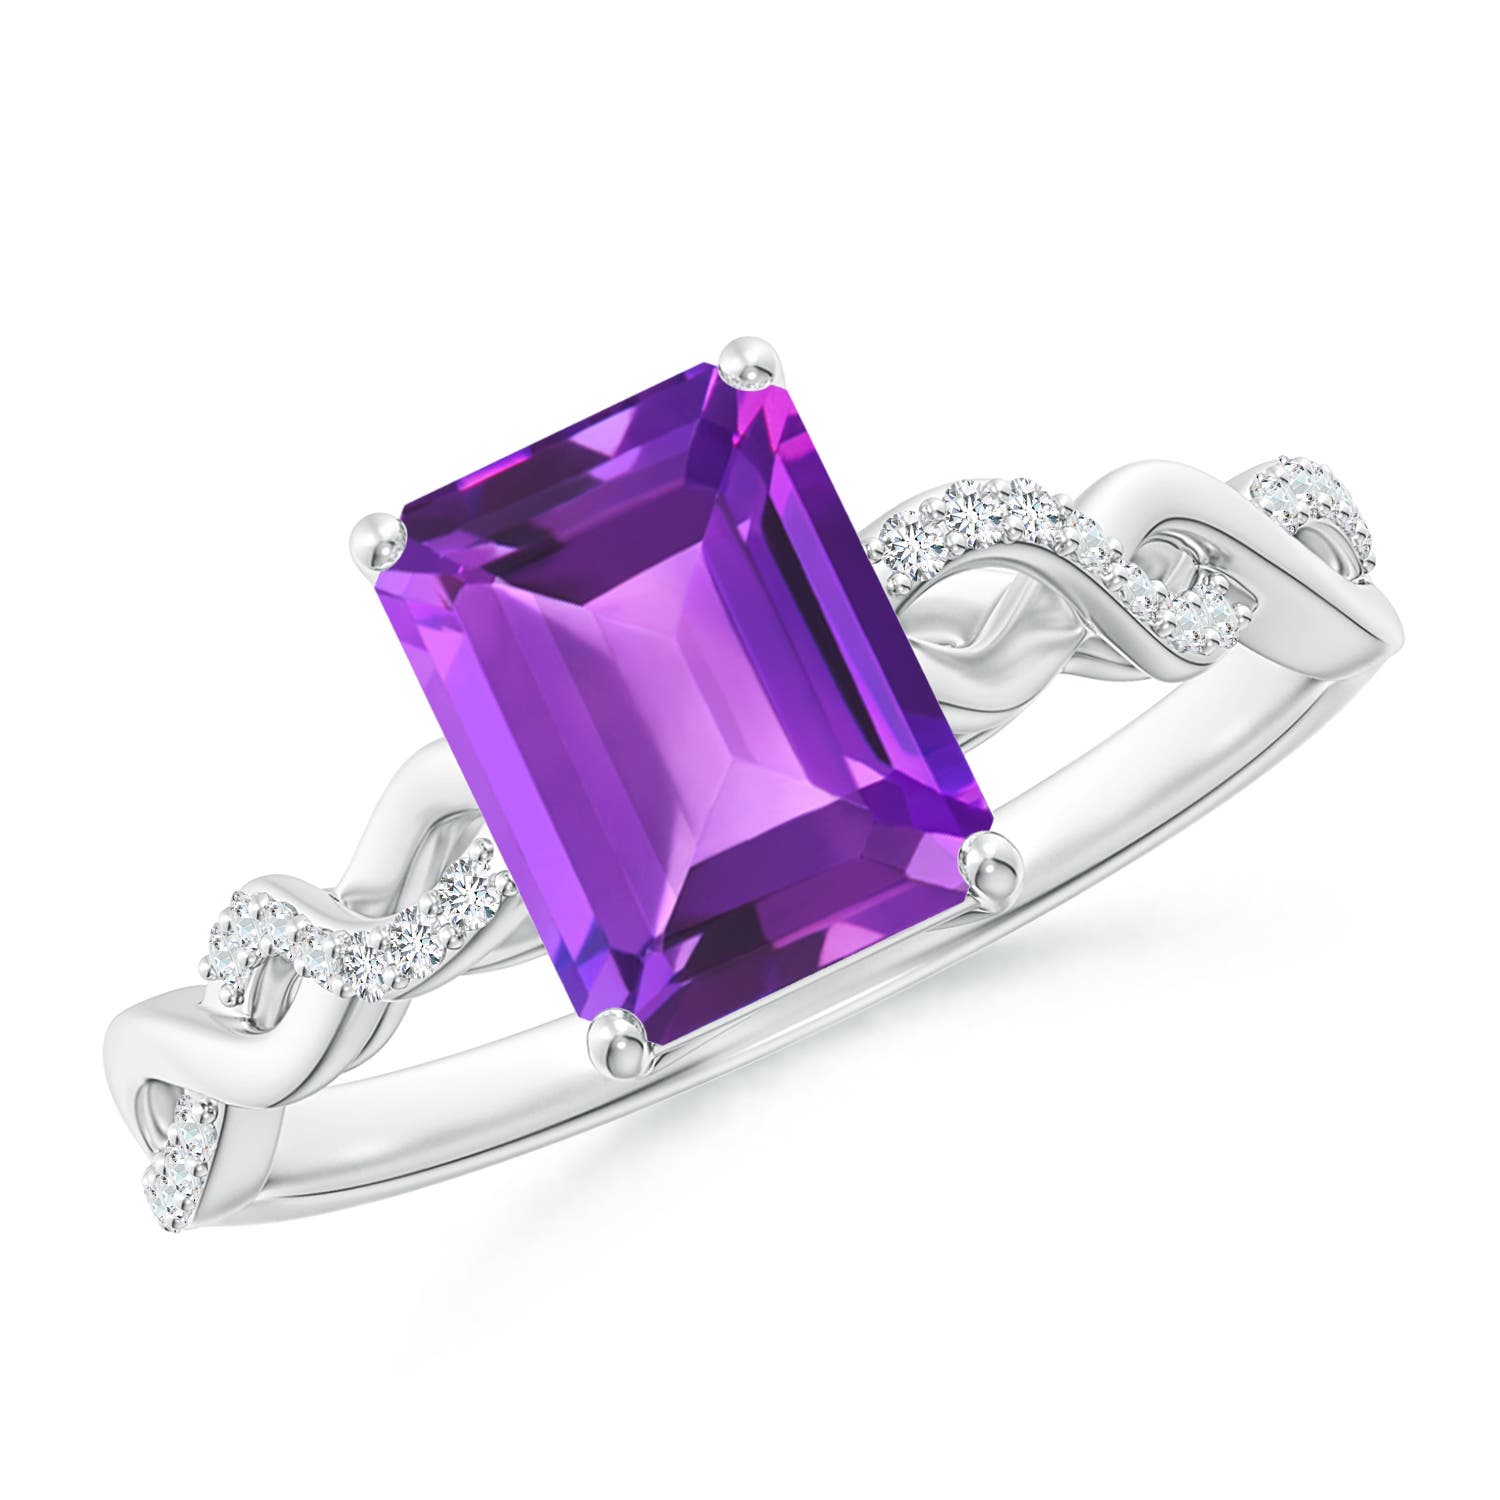 AAA - Amethyst / 1.63 CT / 14 KT White Gold